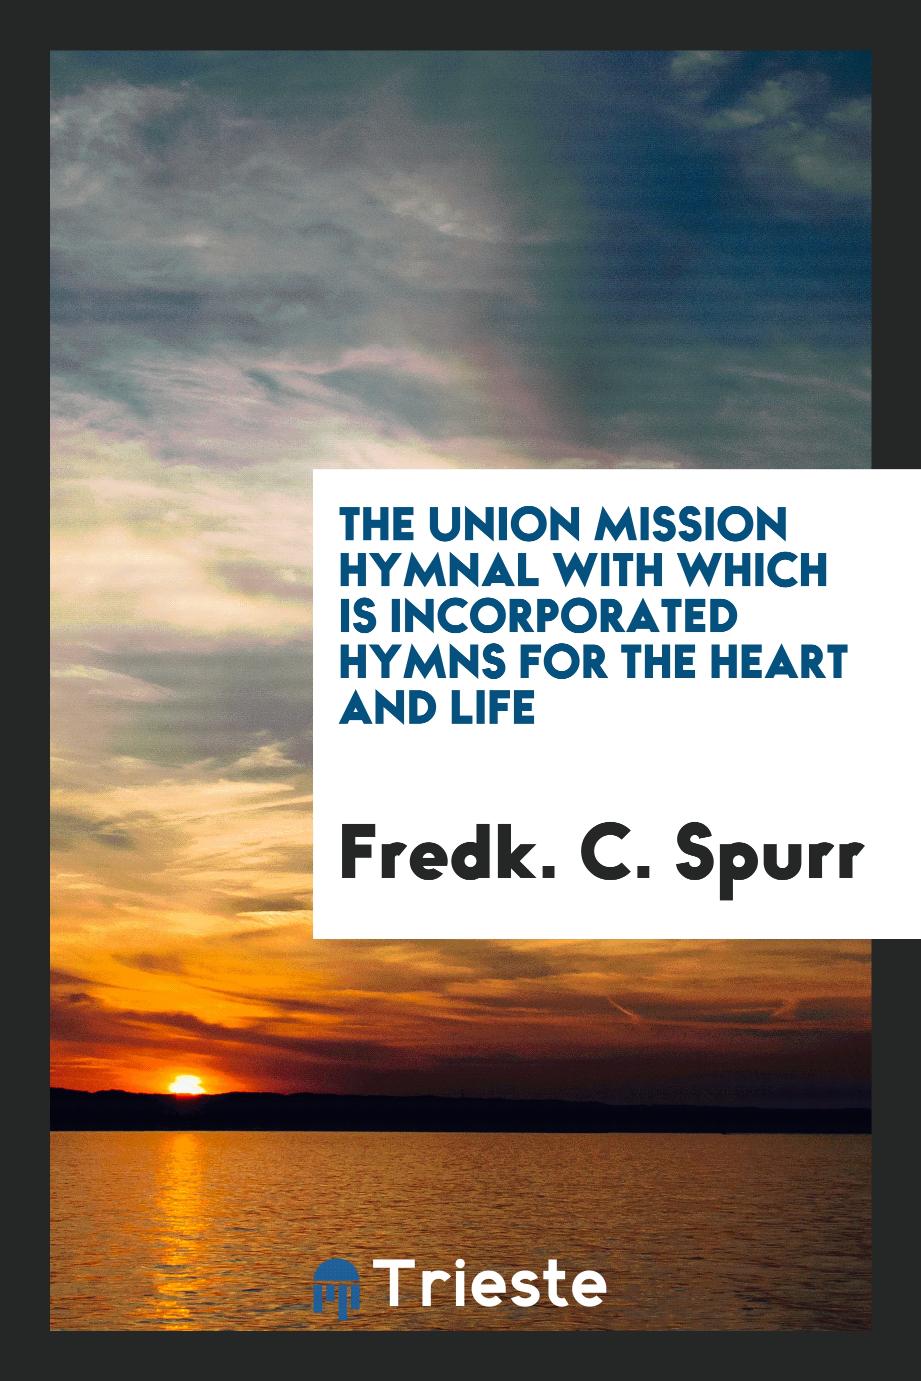 The Union Mission hymnal with which is incorporated hymns for the heart and life